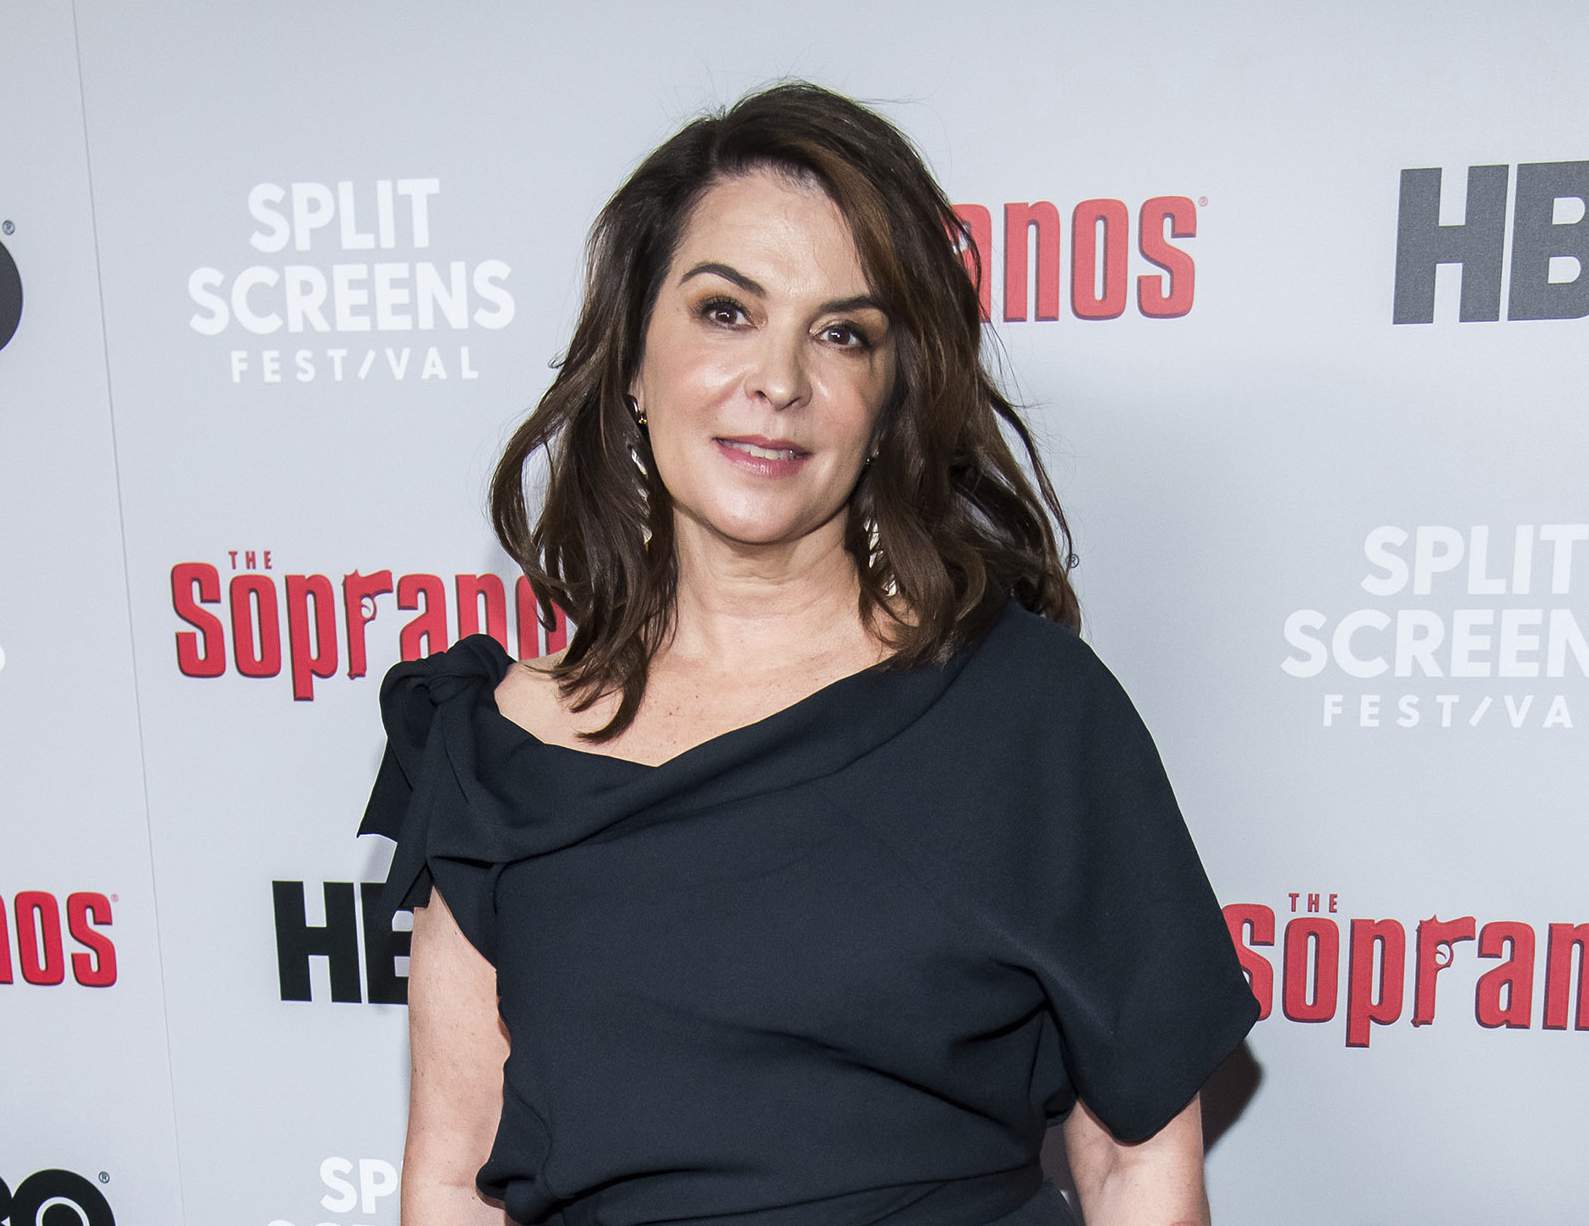 'Sopranos' actress says Weinstein raped her in the mid-1990s